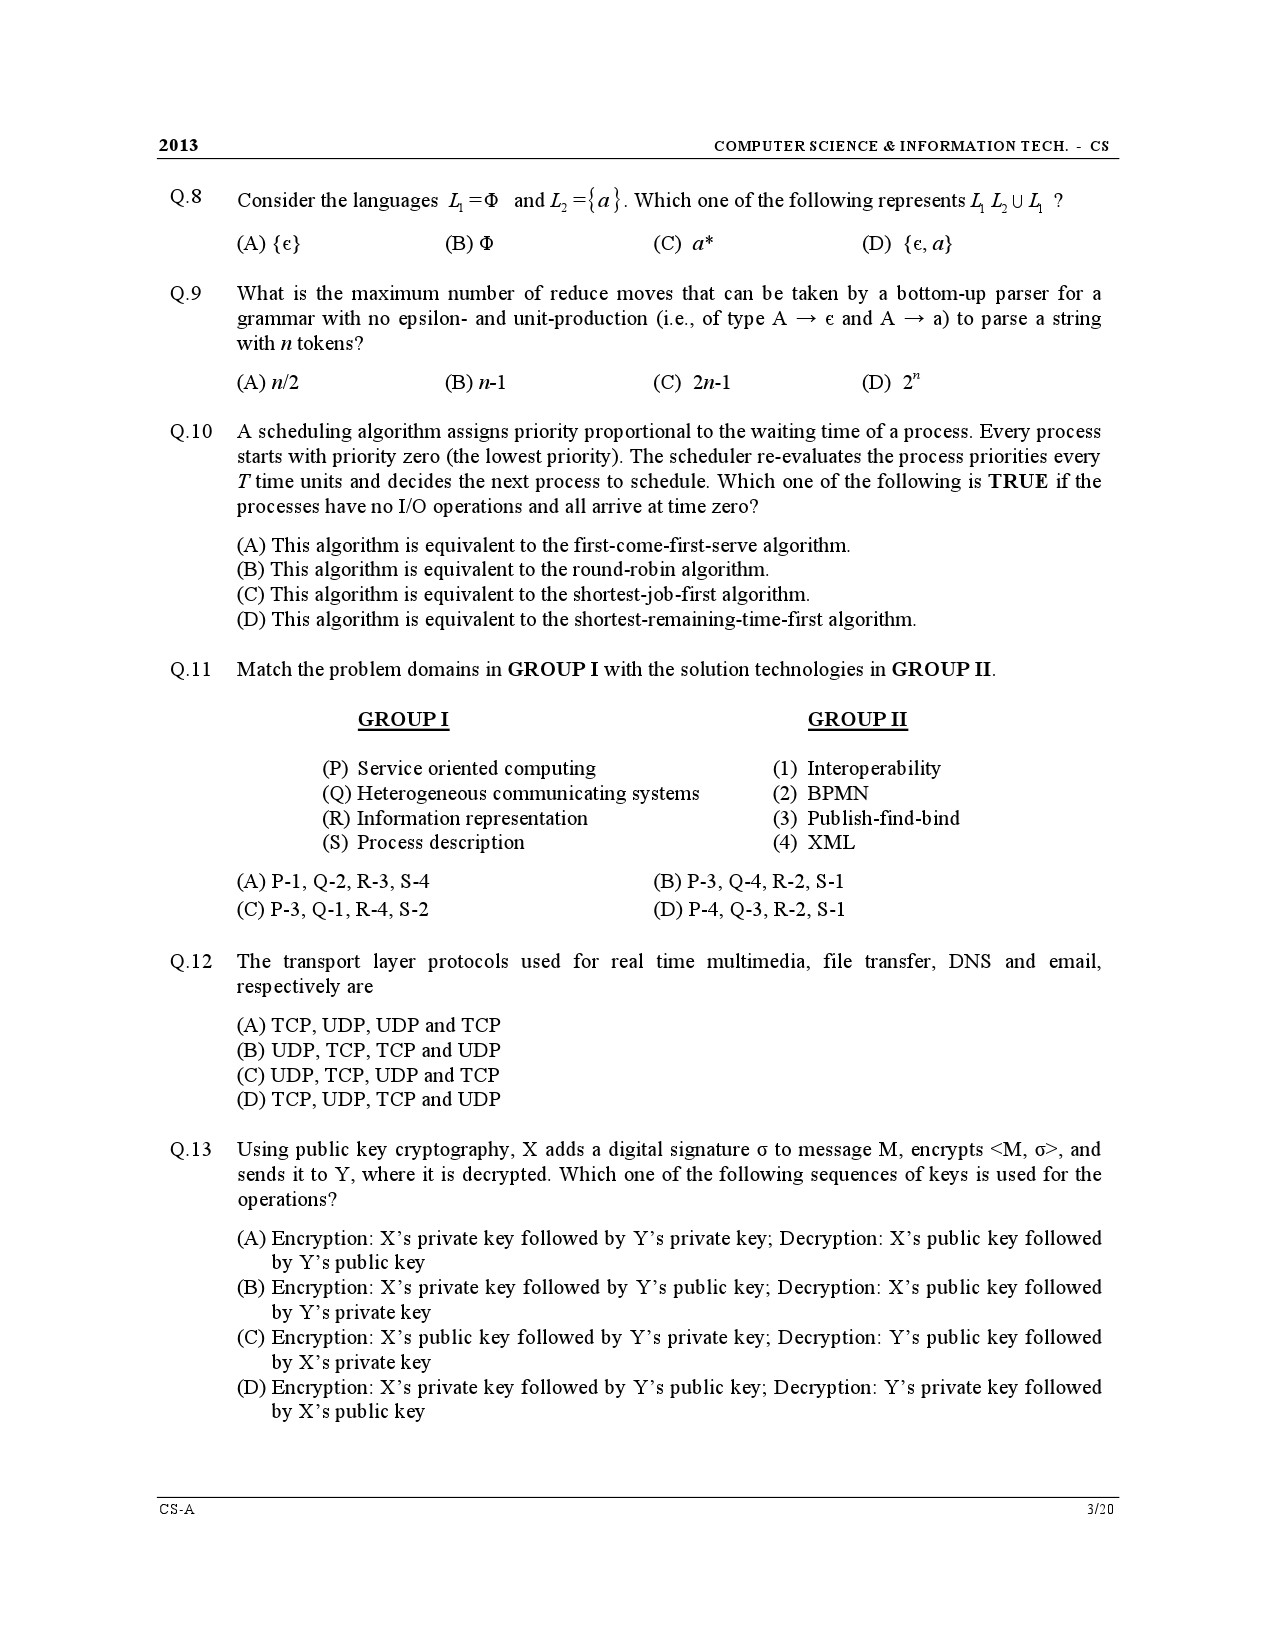 GATE Exam Question Paper 2013 Computer Science and Information Technology 3